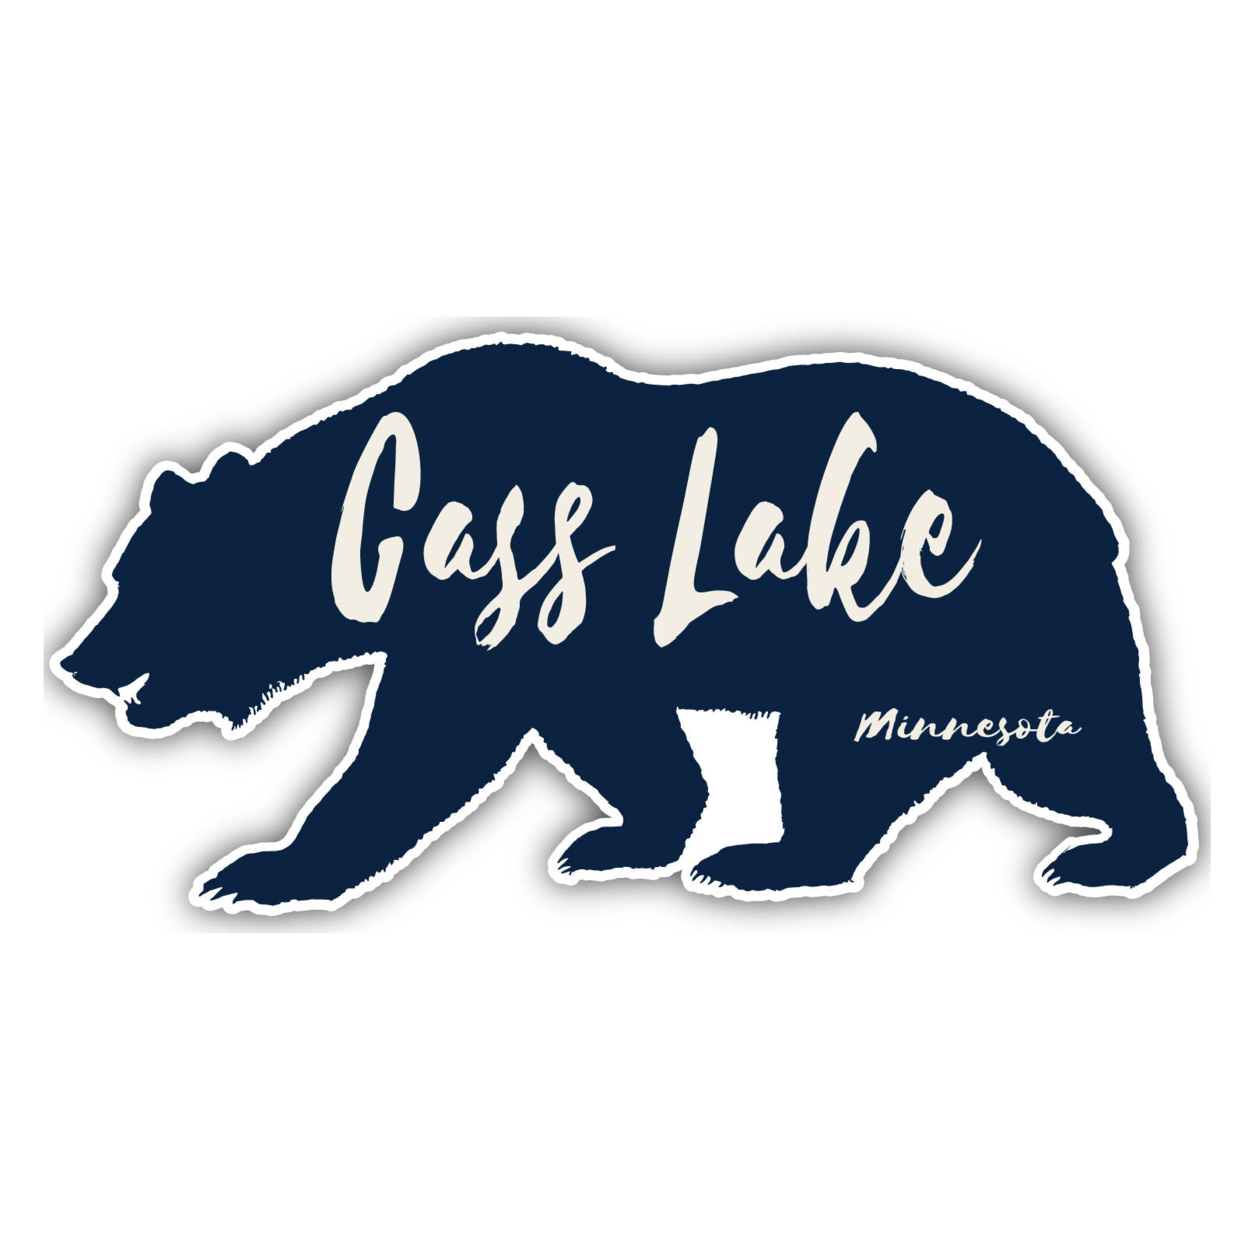 Cass Lake Minnesota Souvenir Decorative Stickers (Choose Theme And Size) - 4-Pack, 2-Inch, Camp Life